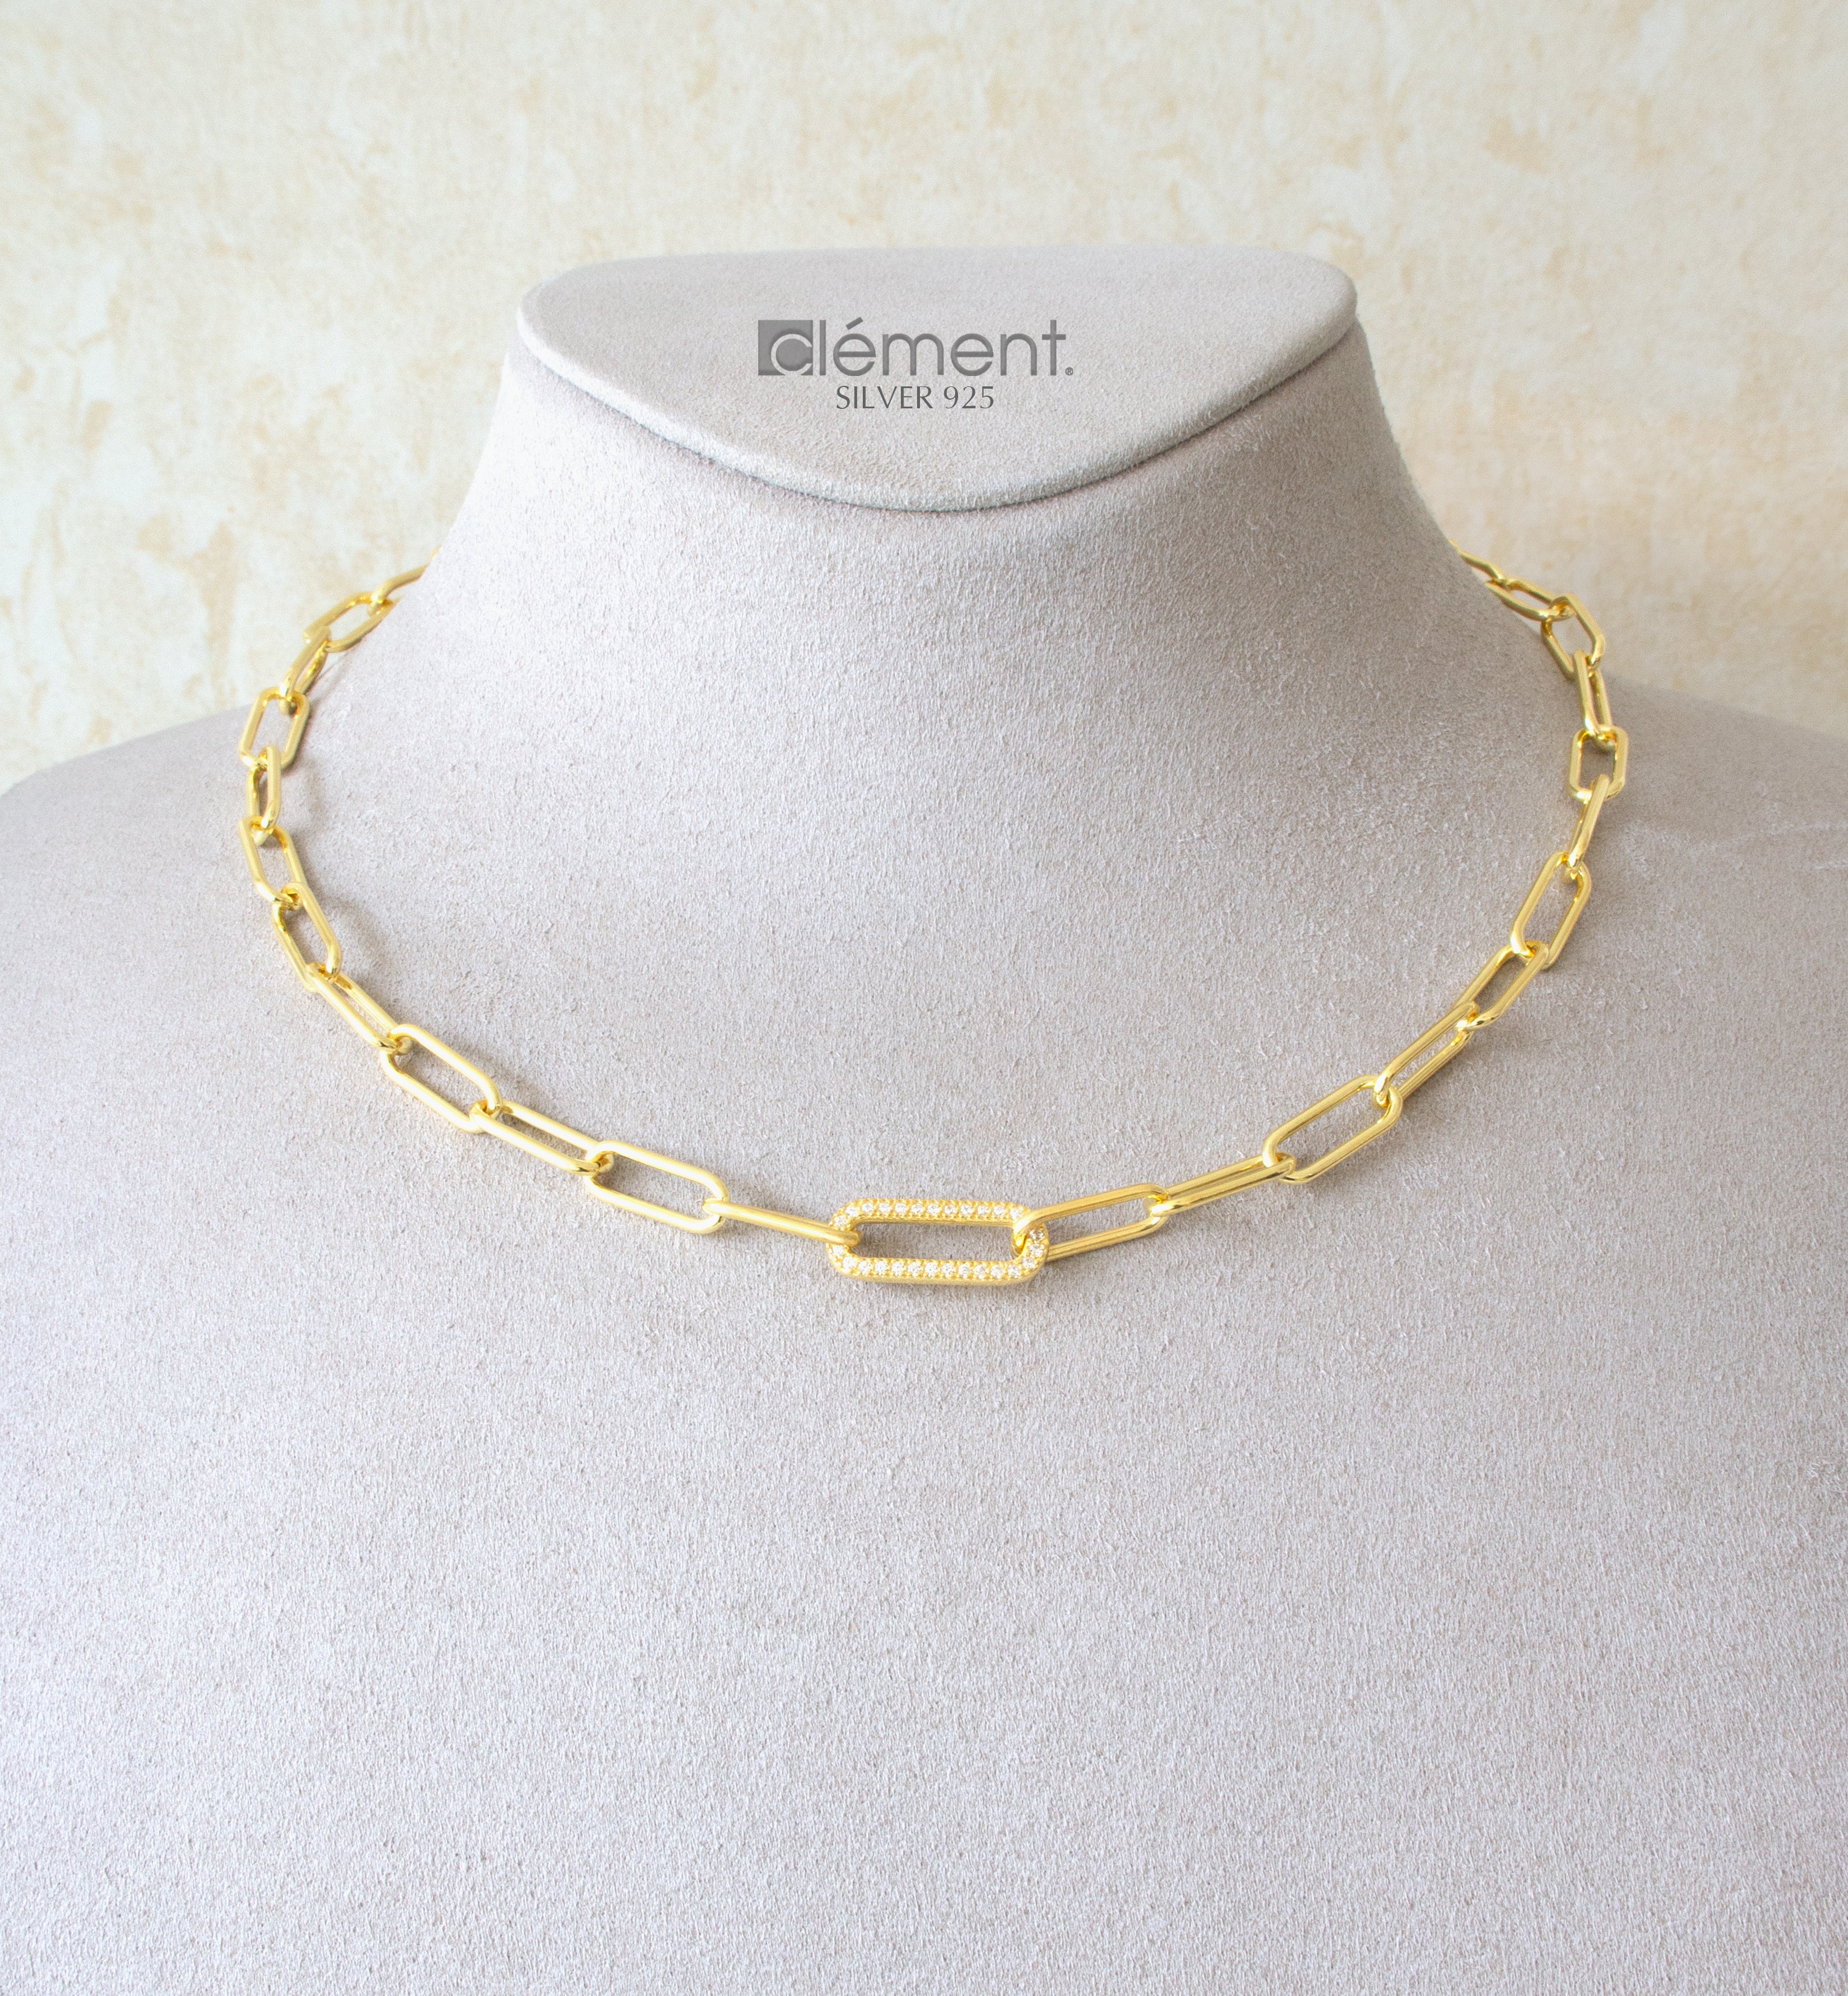 Silver 925 Yellow Gold Plated Link Necklace with CZ Stones